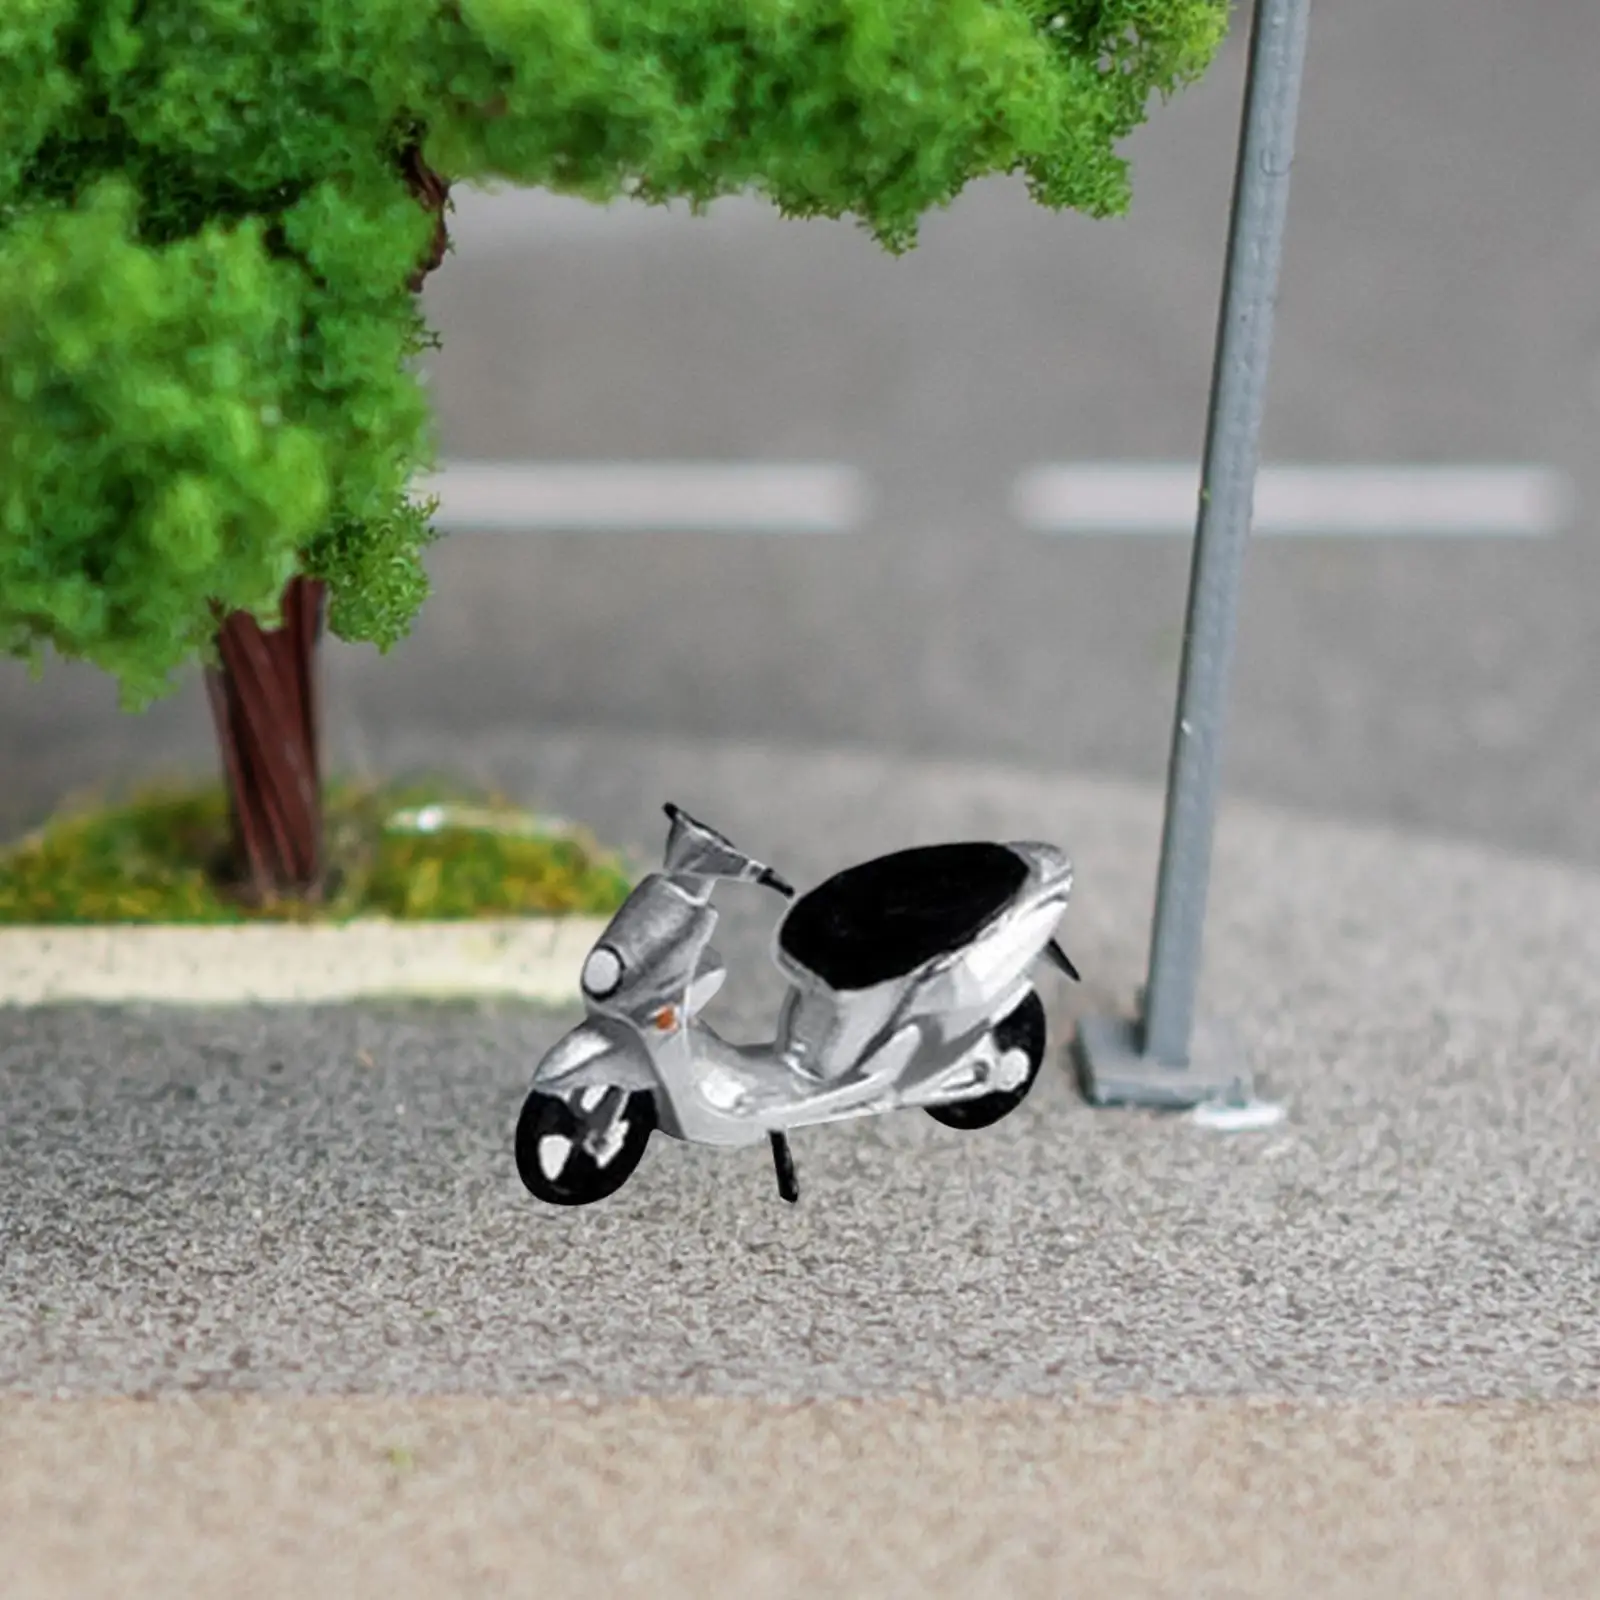 1/64 Motorcycle Model Figure Resin Miniature Doll Model for Micro Landscapes